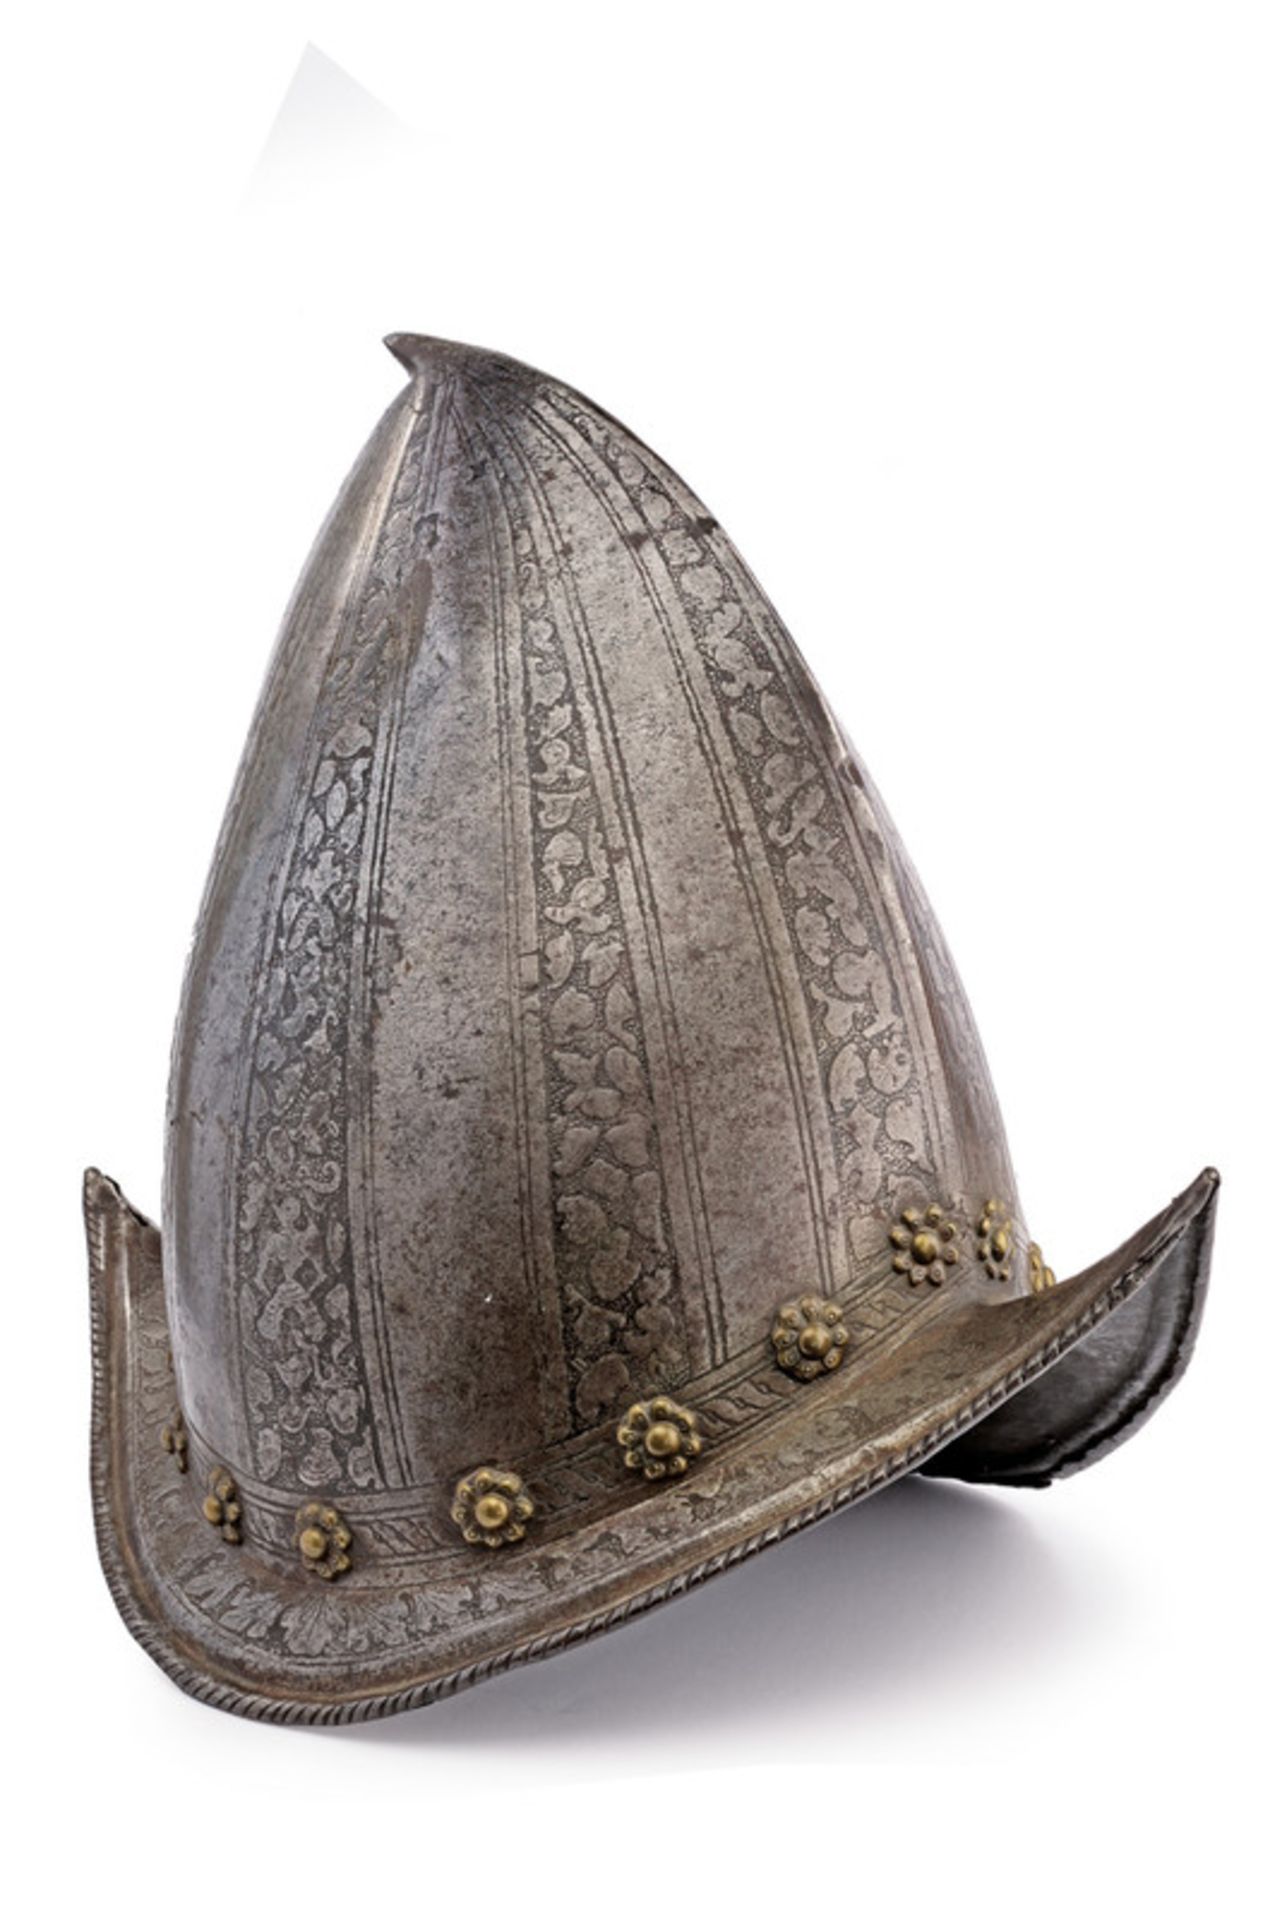 A cabasset morion etched in Pisan style